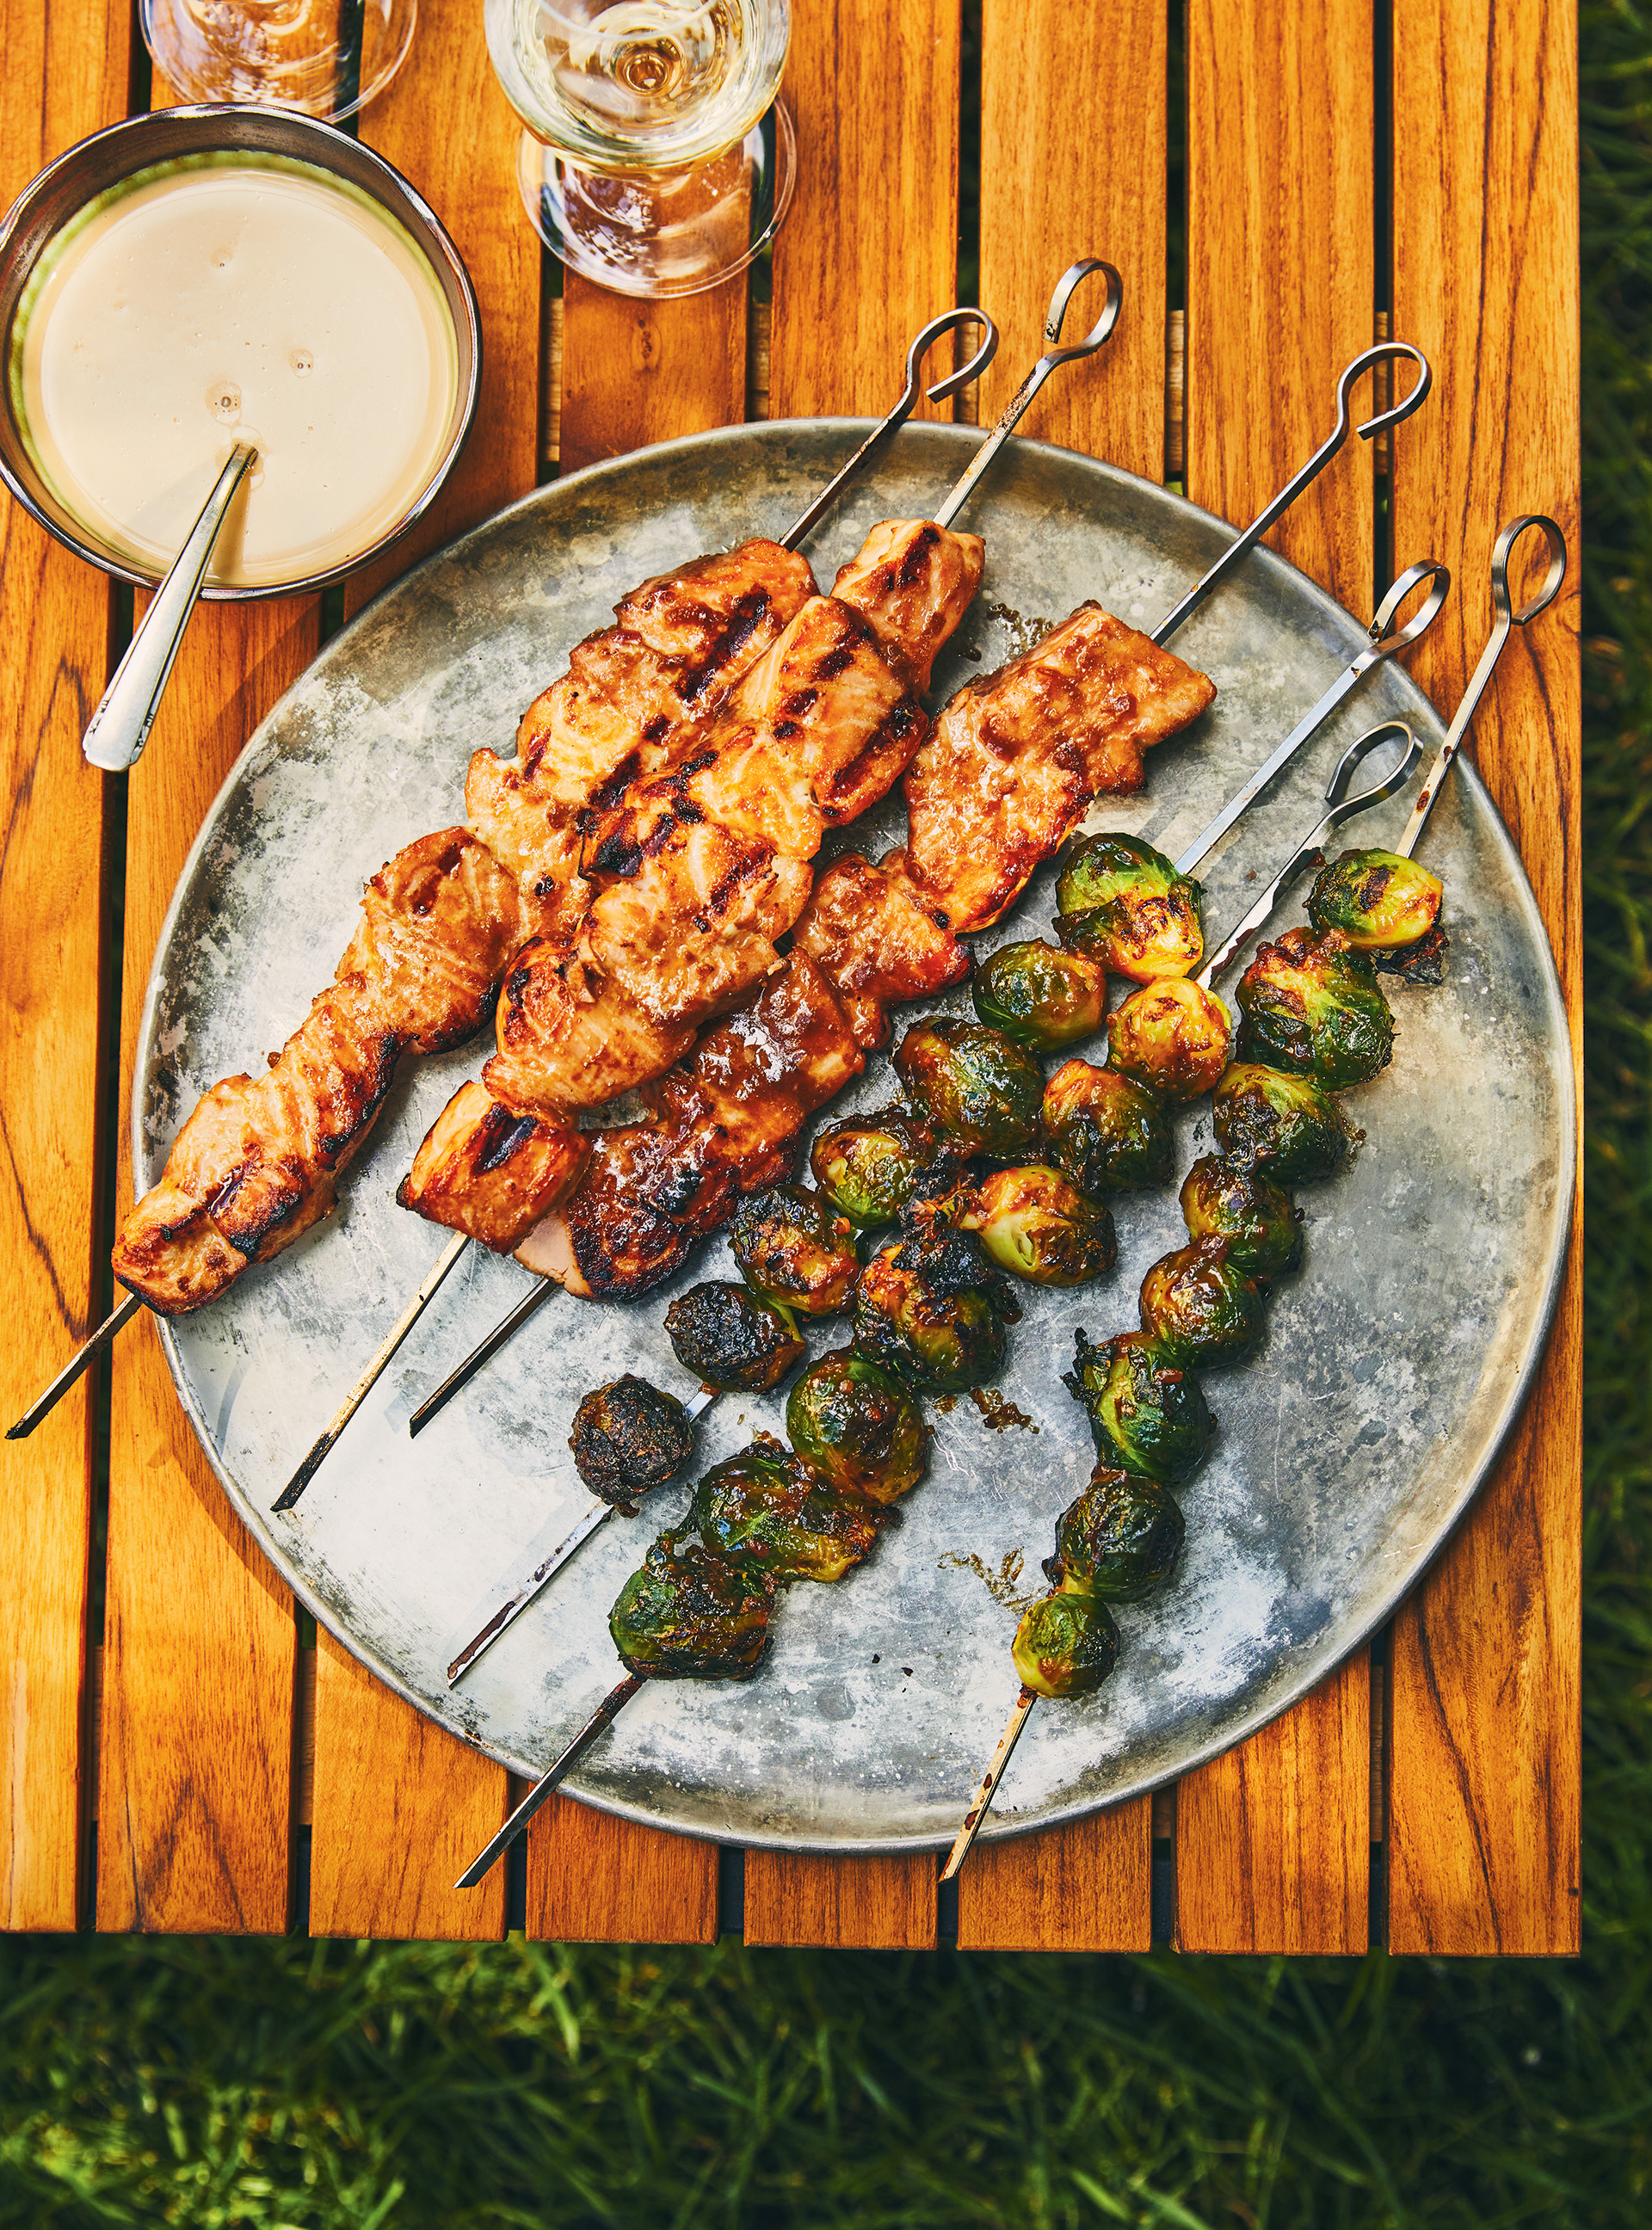 Salmon and Brussels Sprout Skewers with Soy, Miso and Maple Syrup